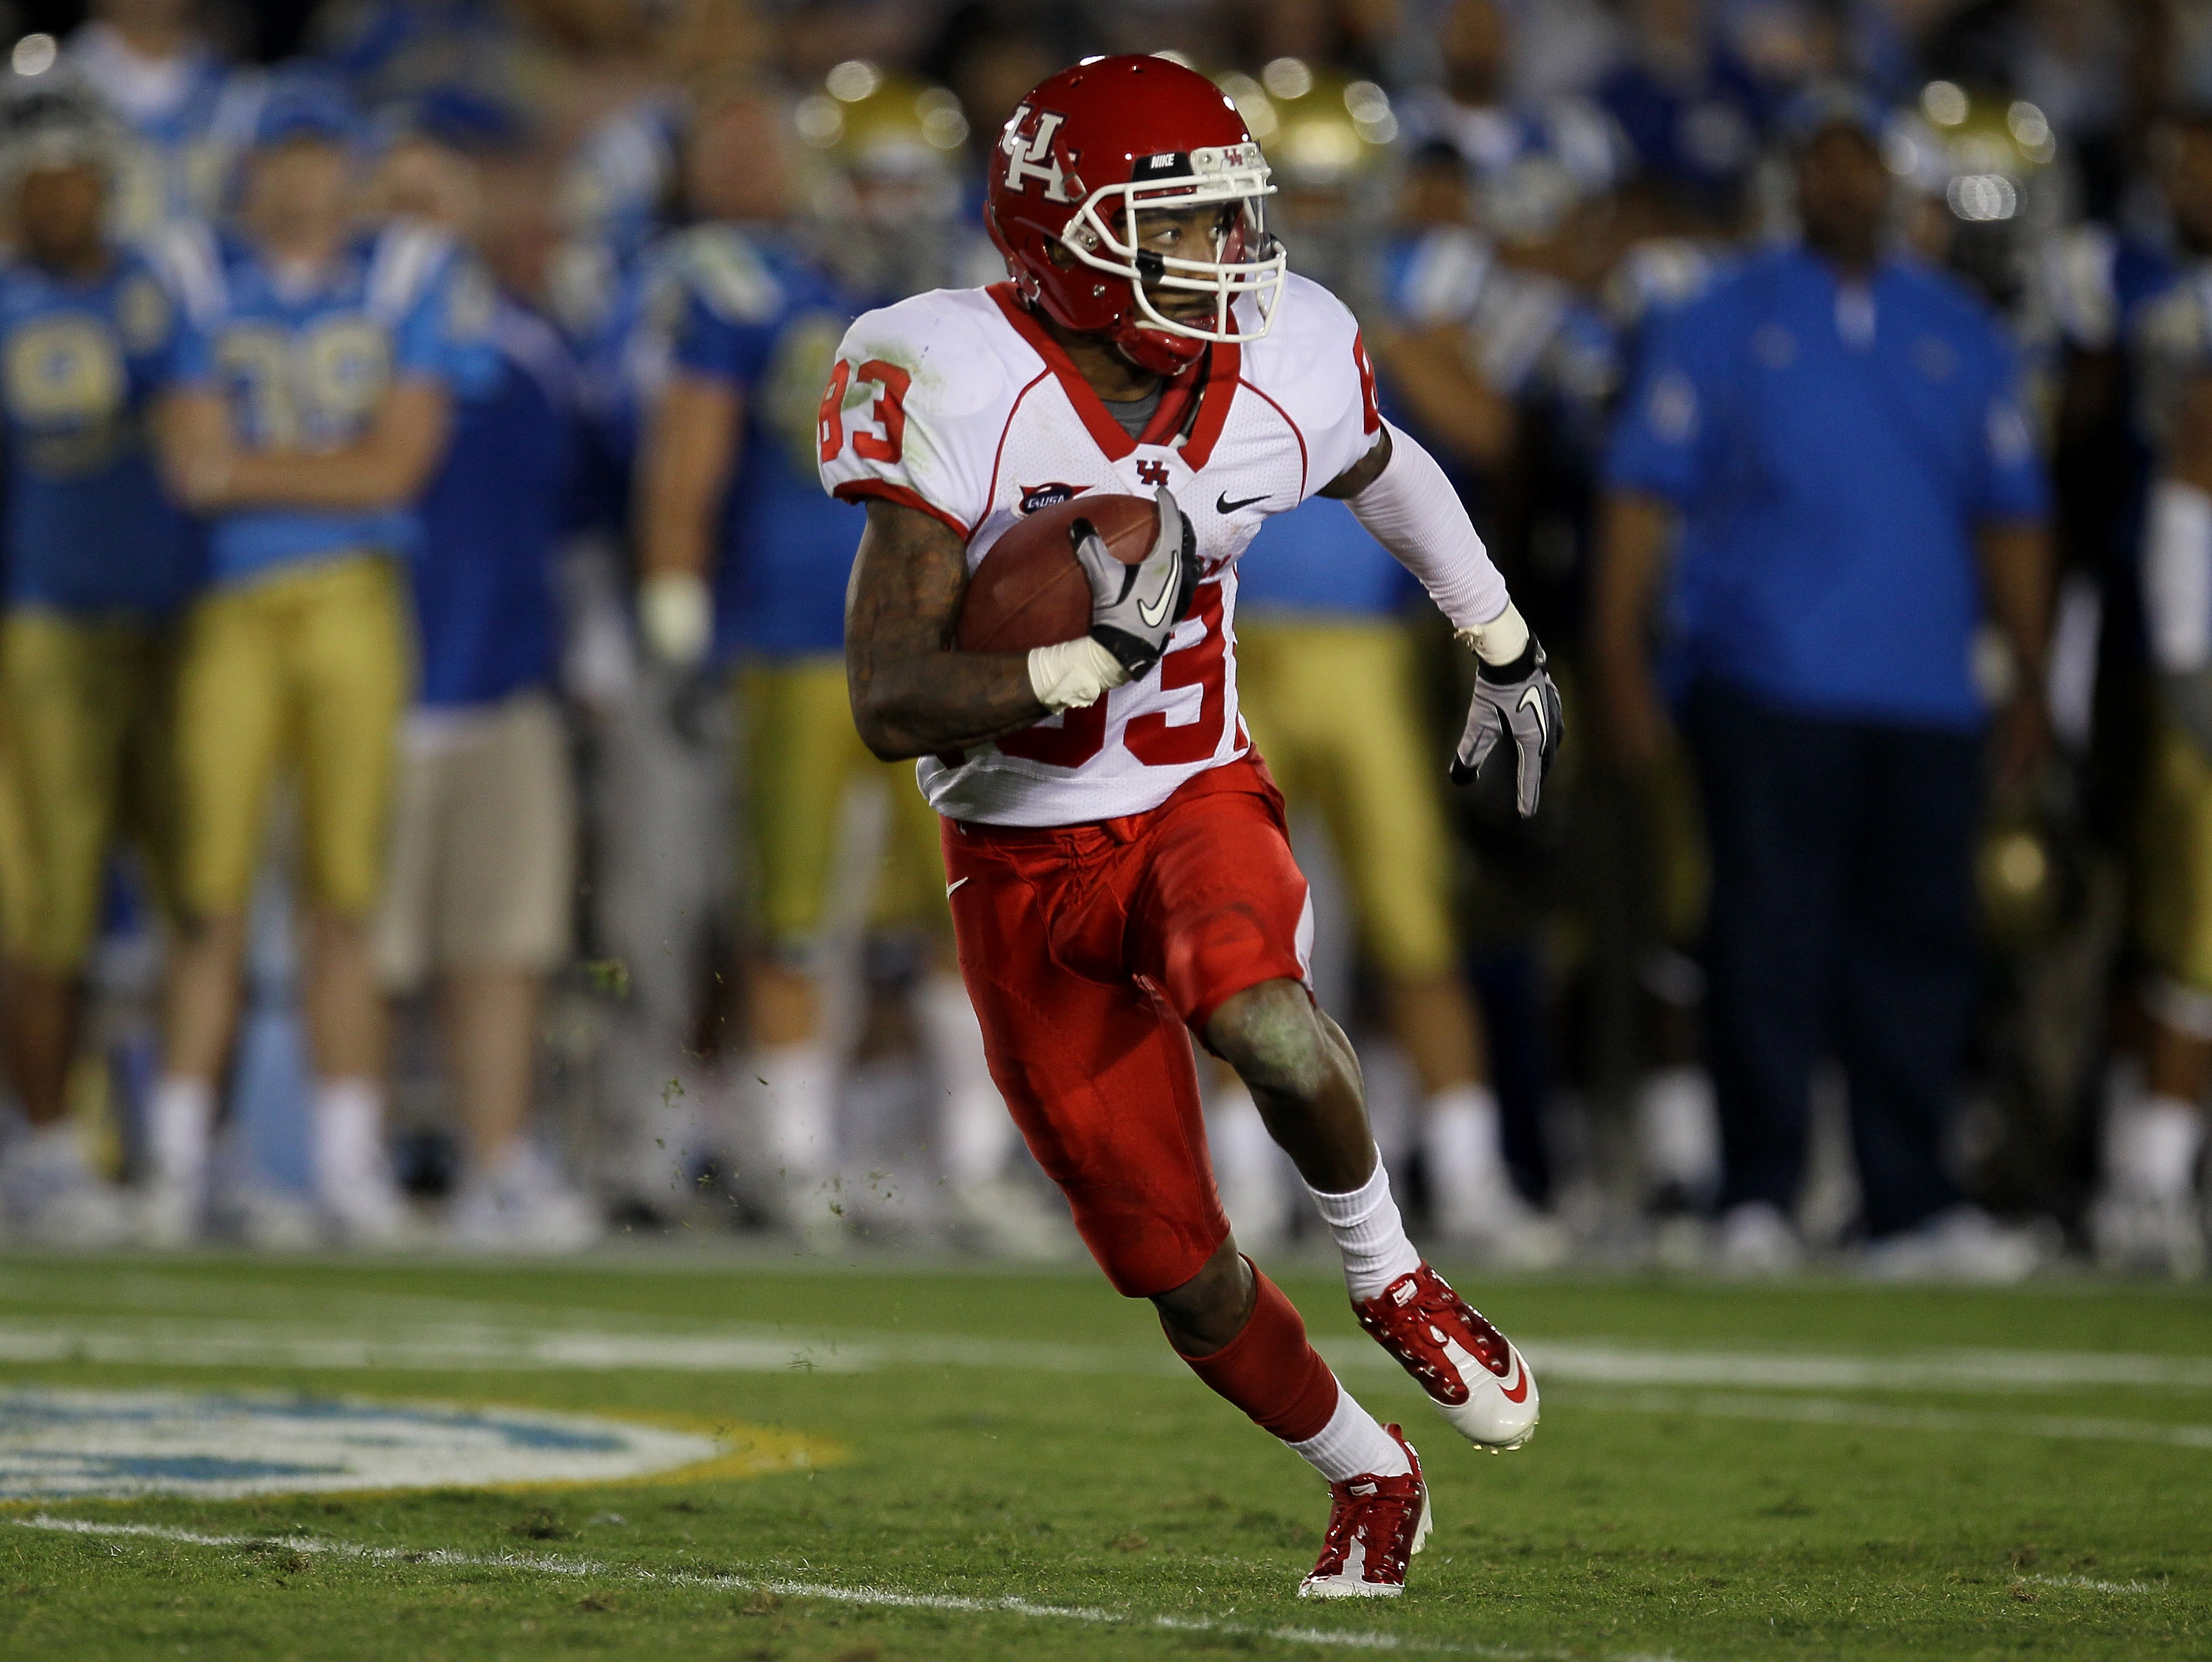 PASADENA, CA - SEPTEMBER 18:  Wide receiver Patrick Edwards #83 of the Houston Cougars carries the ball against the UCLA Bruins at the Rose Bowl on September 18, 2010 in Pasadena, California.  UCLA won 31-13.  (Photo by Stephen Dunn/Getty Images)